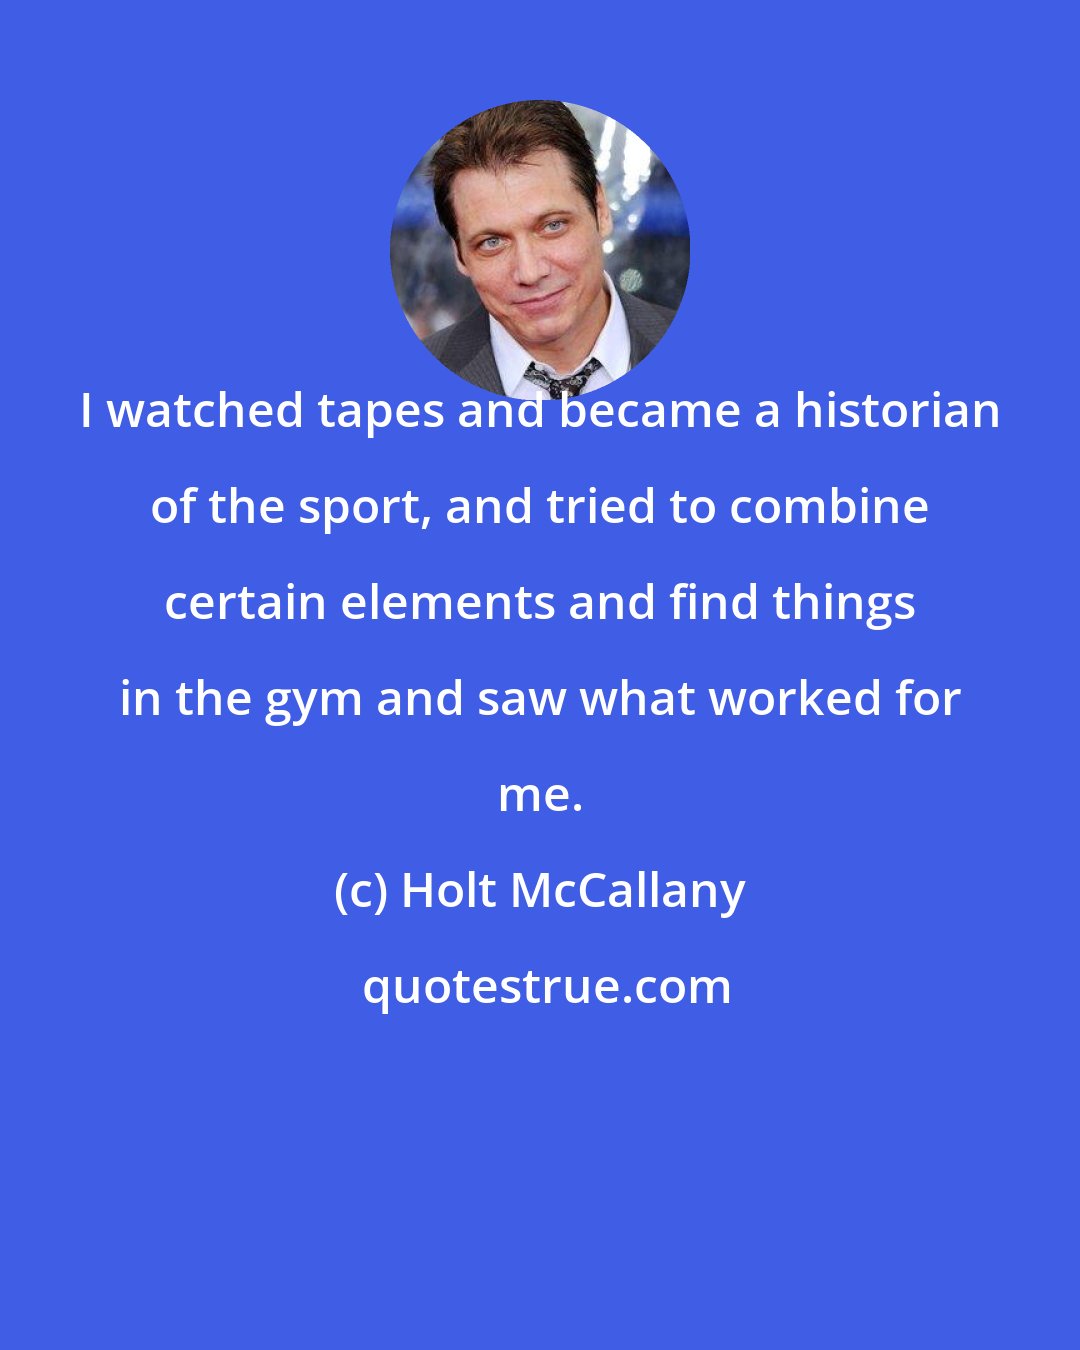 Holt McCallany: I watched tapes and became a historian of the sport, and tried to combine certain elements and find things in the gym and saw what worked for me.